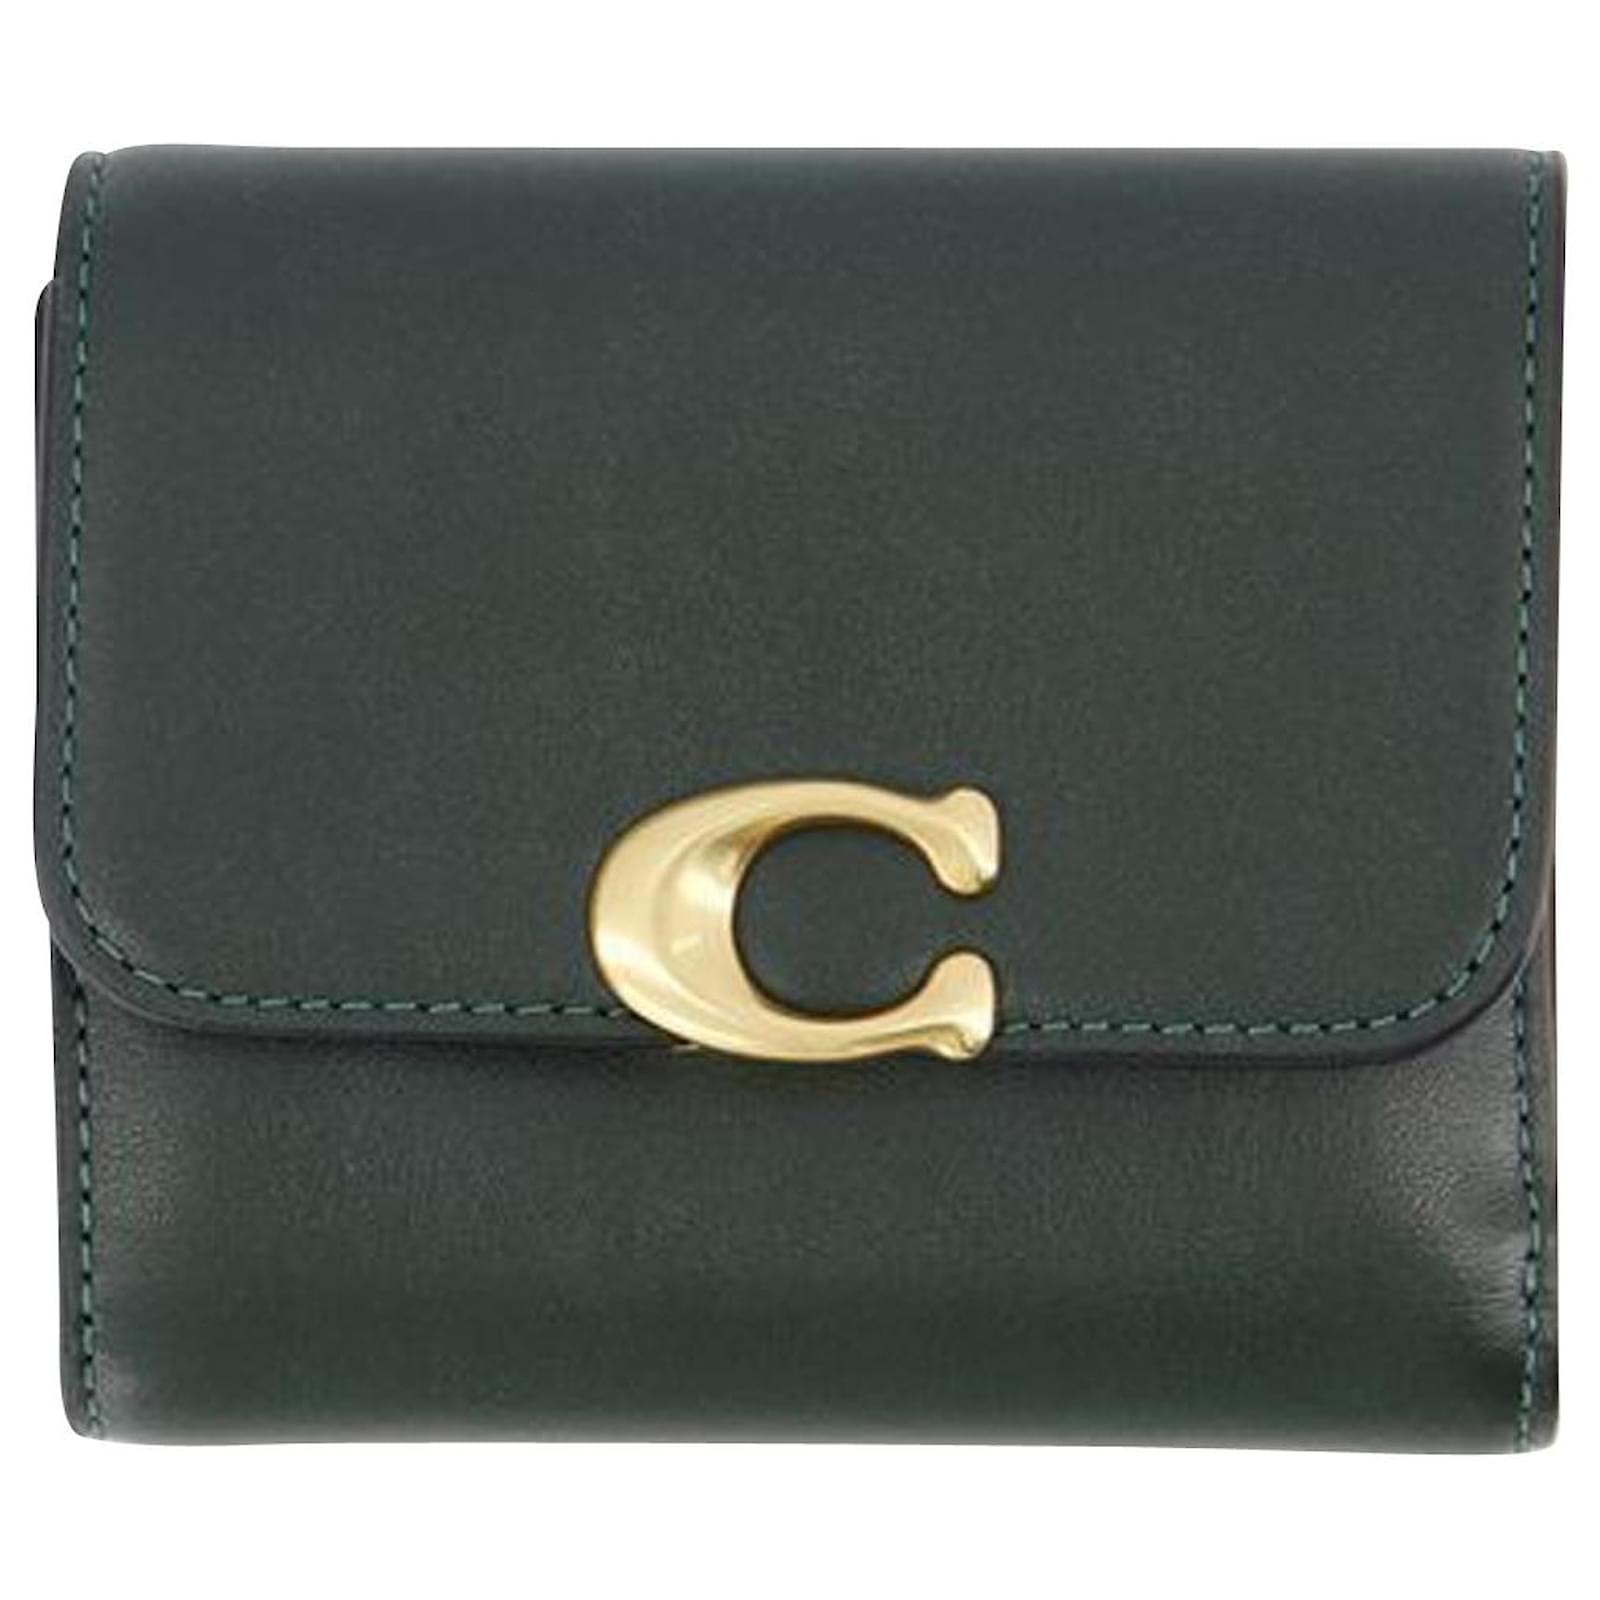 Bandit Wallet - Coach - Leather - Green Pony-style calfskin ref